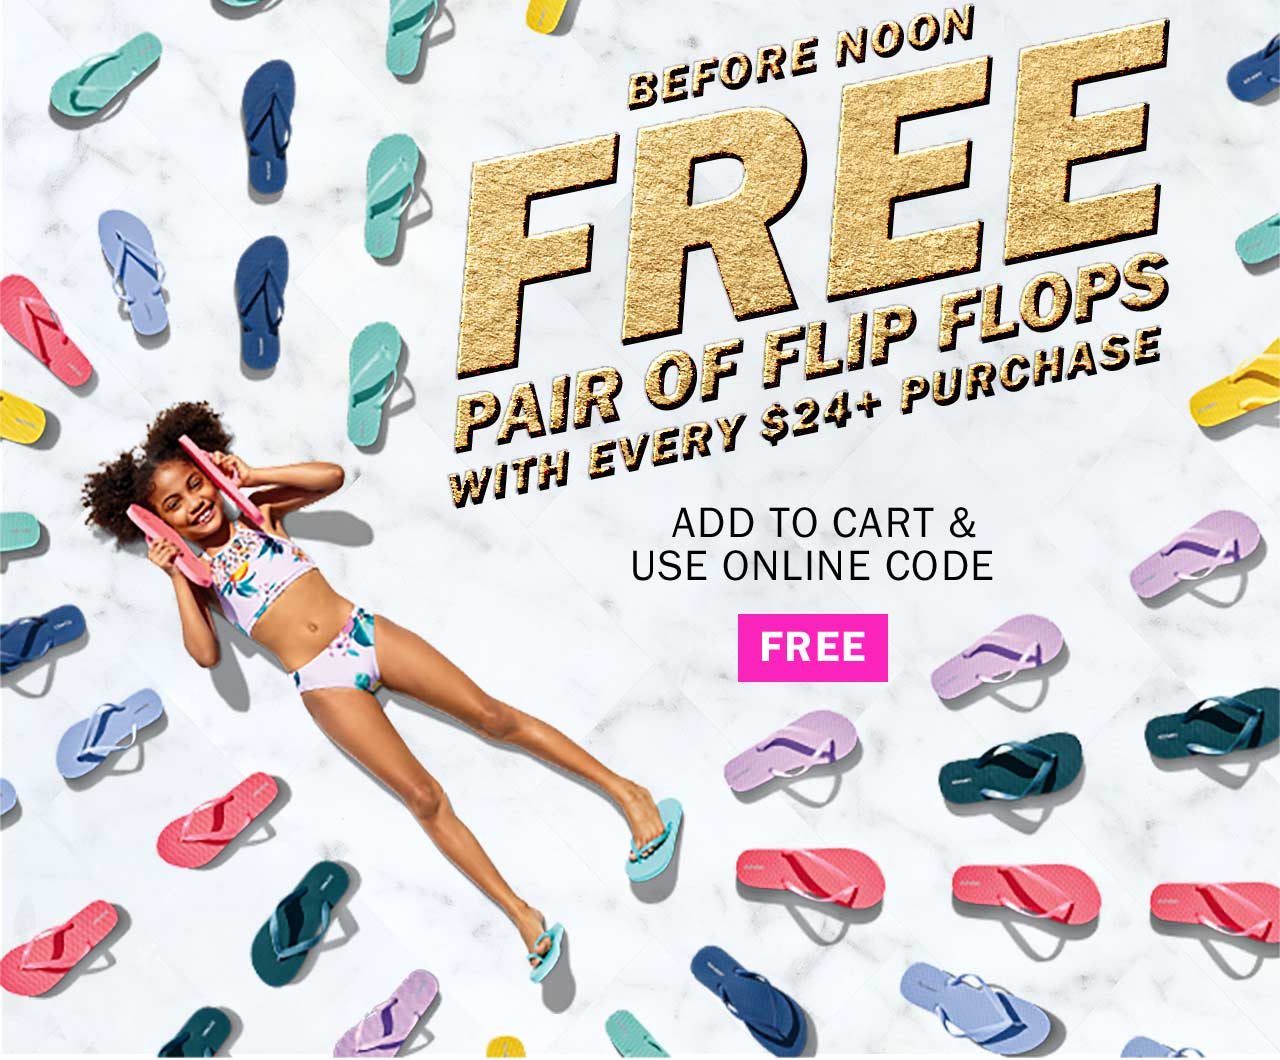 BEFORE NOON FREE PAIR OF FLIP FLOPS WITH EVERY $24+ PURCHASE